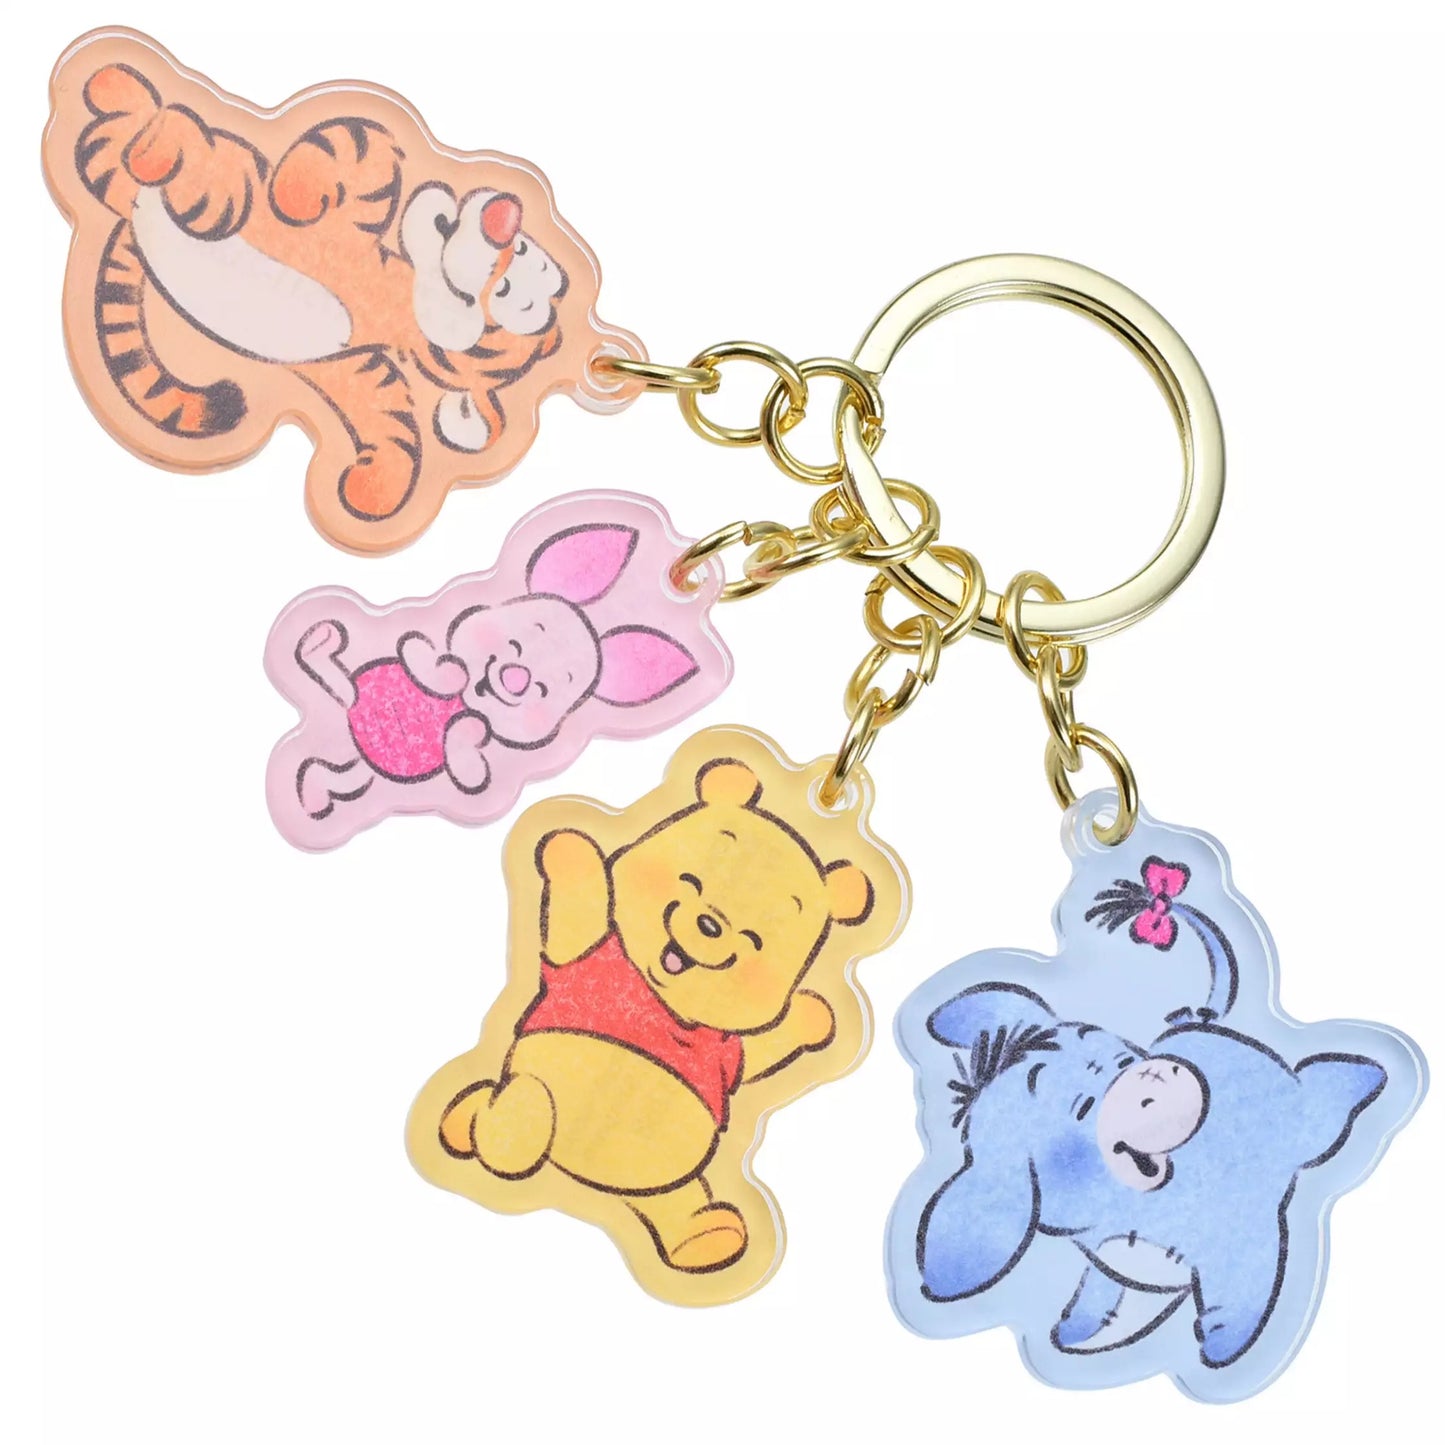 Pooh & Friends 四連環匙扣 Disney ARTIST COLLECTION by Lommy